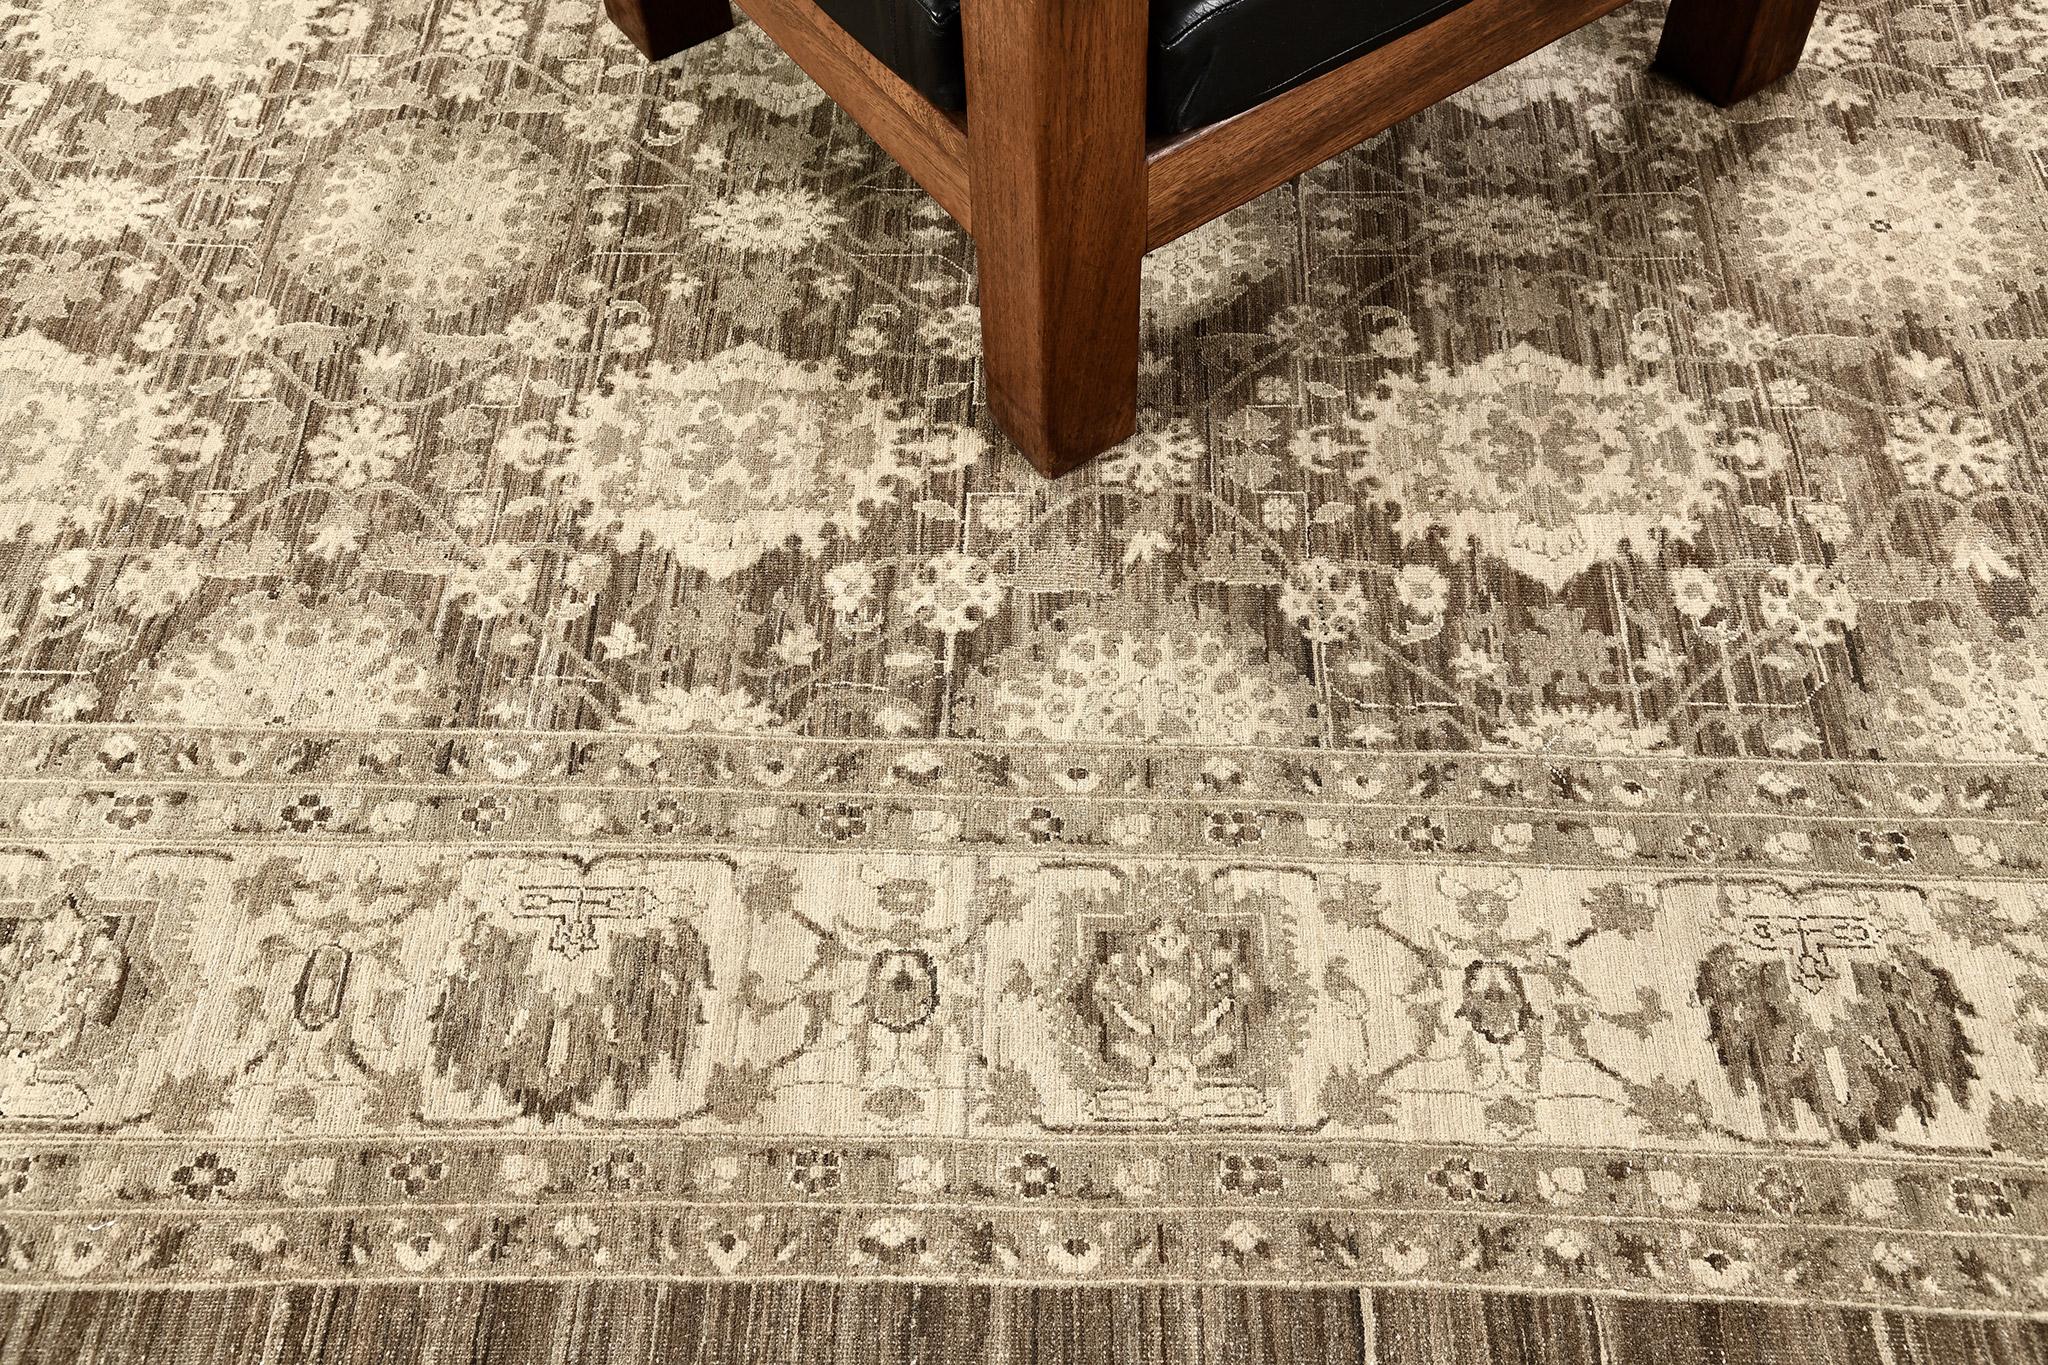 This enchanting revival of the Mahal rug has created an impressive pattern. Featuring the well-coordinated neutral tones and a tinted palette of tans, this elegant rug is composed of enchanting florid elements forming different grandiose medallions